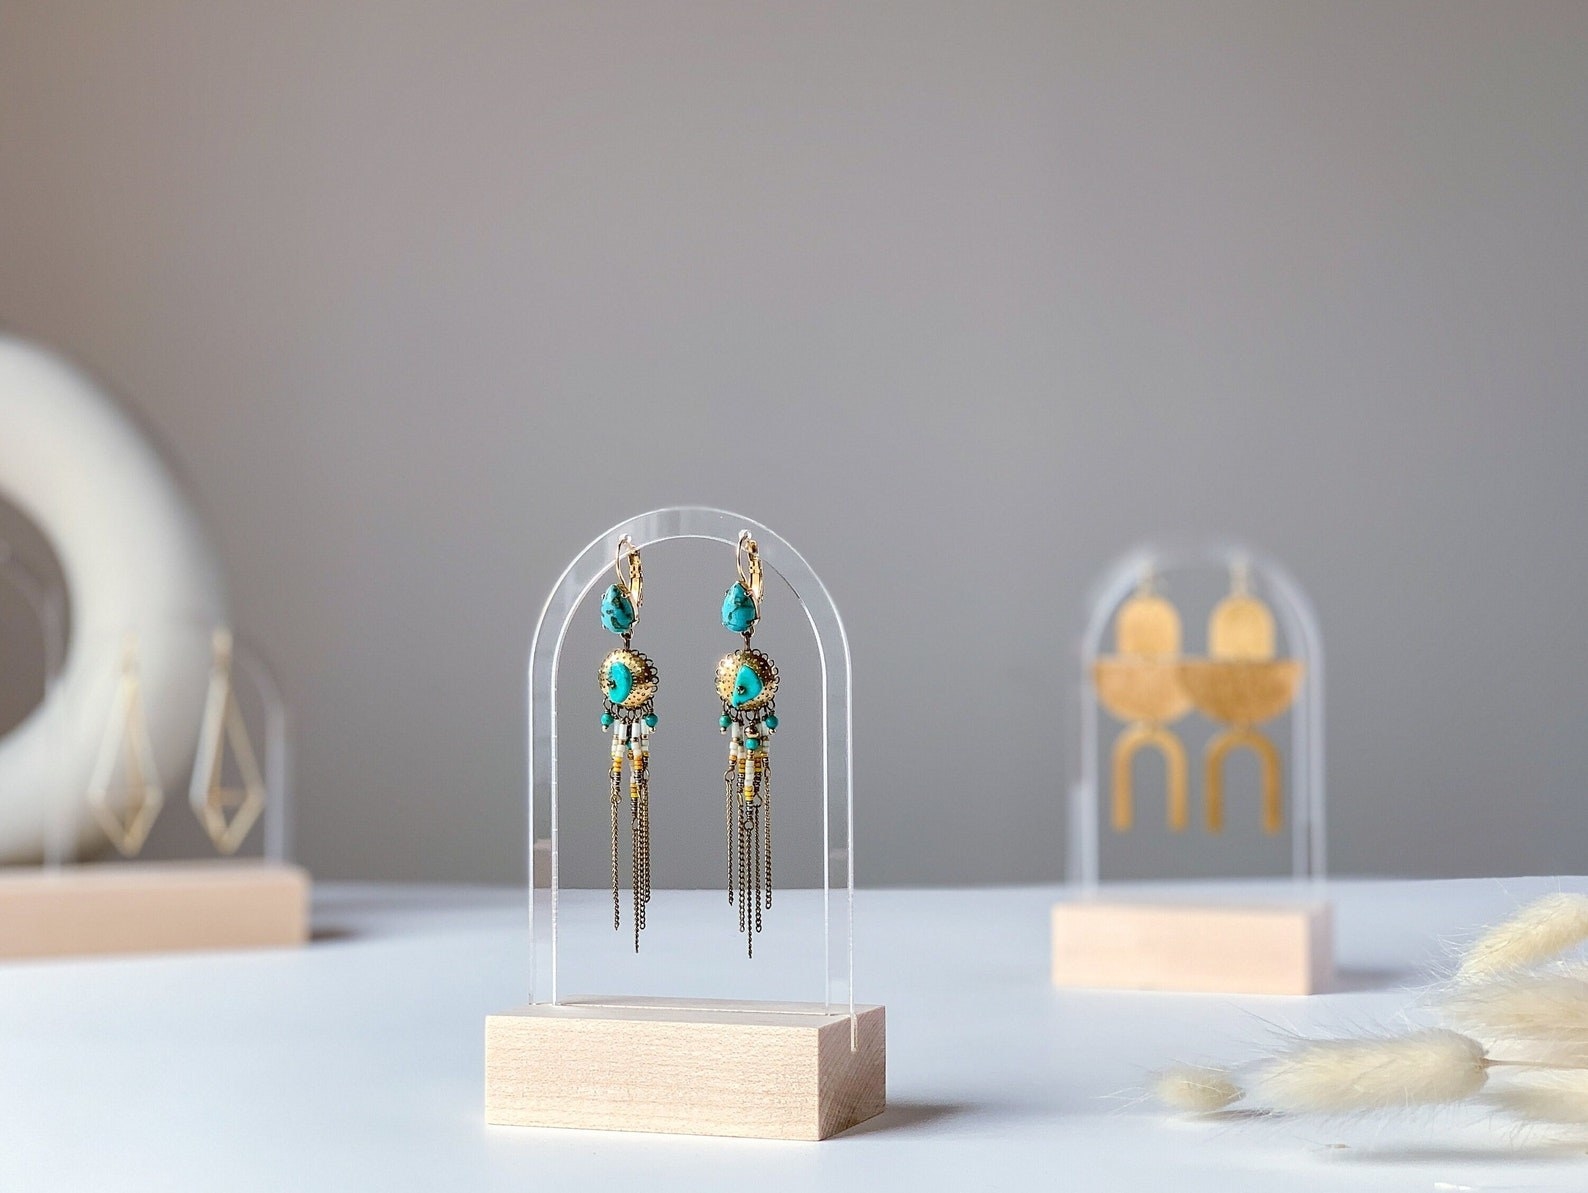 A pair of earring hanging from a small acryrlic display with a wooden base